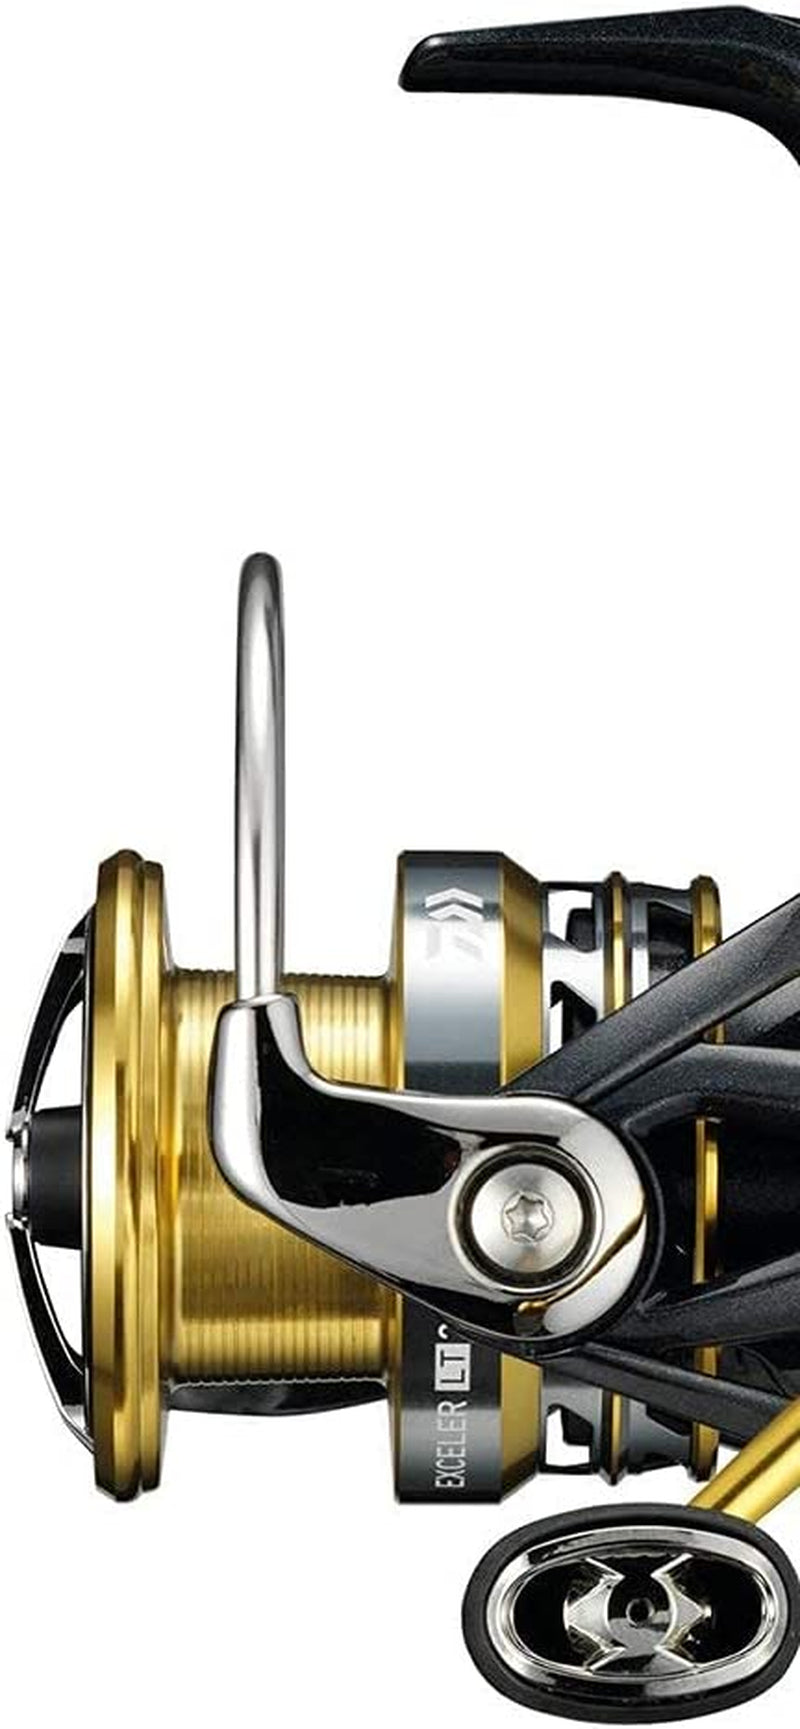 Daiwa Exceler LT 5.3:1 Left/Right Hand Spinning Fishing Reel - EXLT3000D-C Sporting Goods > Outdoor Recreation > Fishing > Fishing Reels Daiwa   